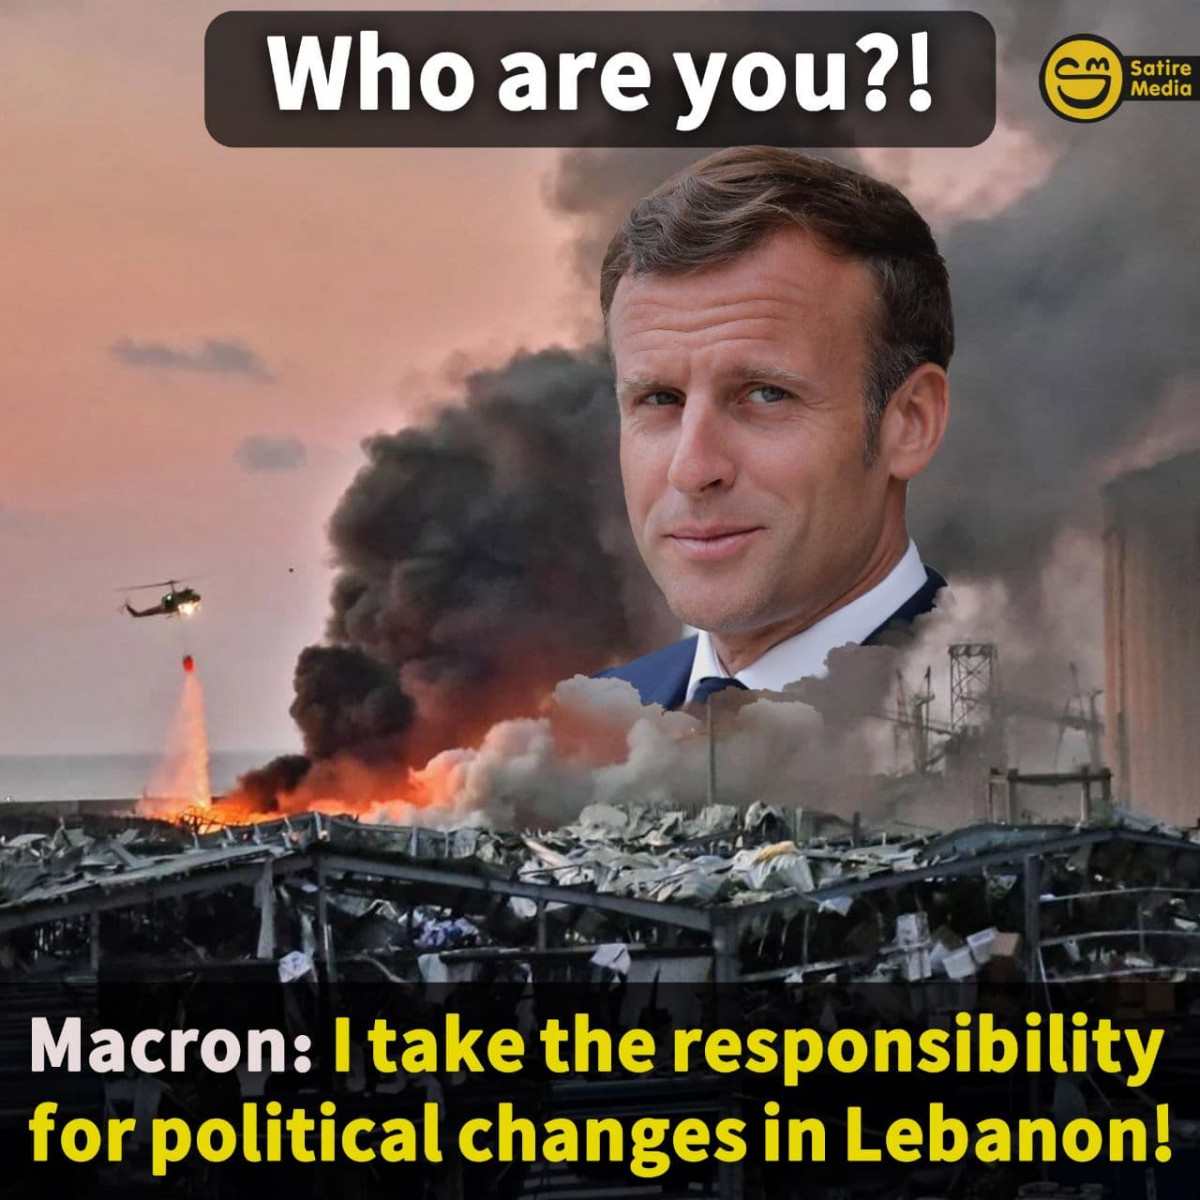 Emmanuel Macron: I take the responsibility for political changes in Lebanon